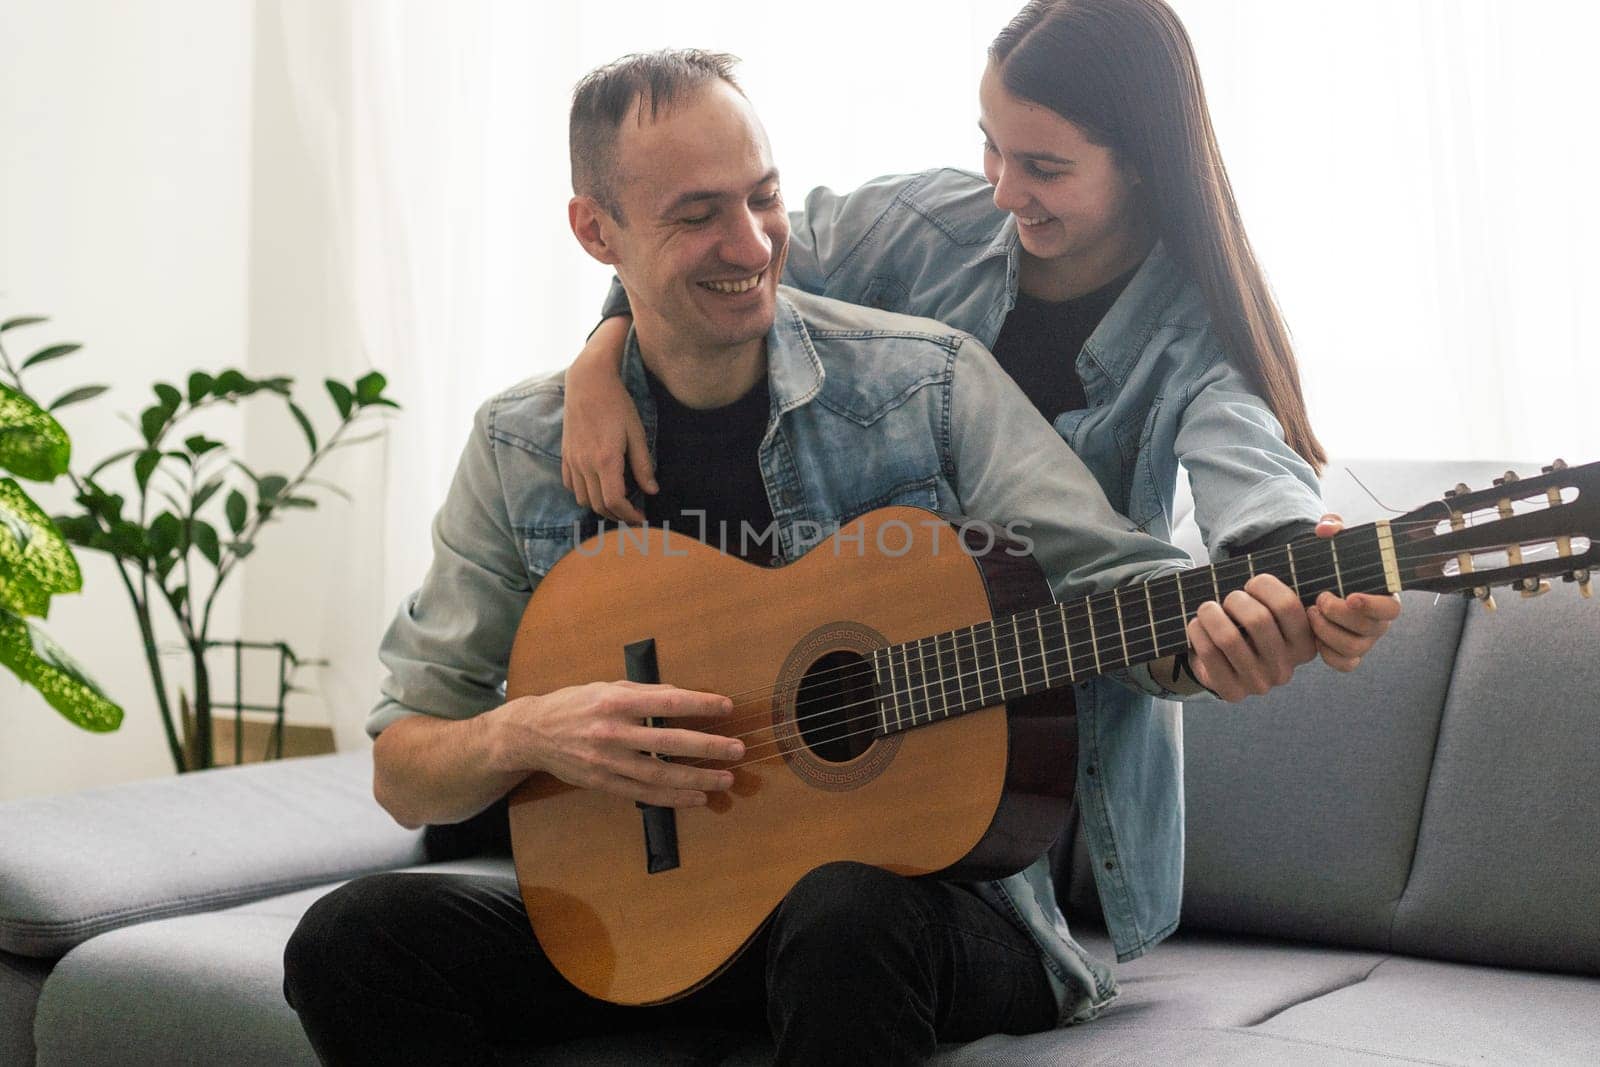 Father guy teaching girl teenager daughter guitar playing at home. Family musical lessons with strings instrument. High quality photo